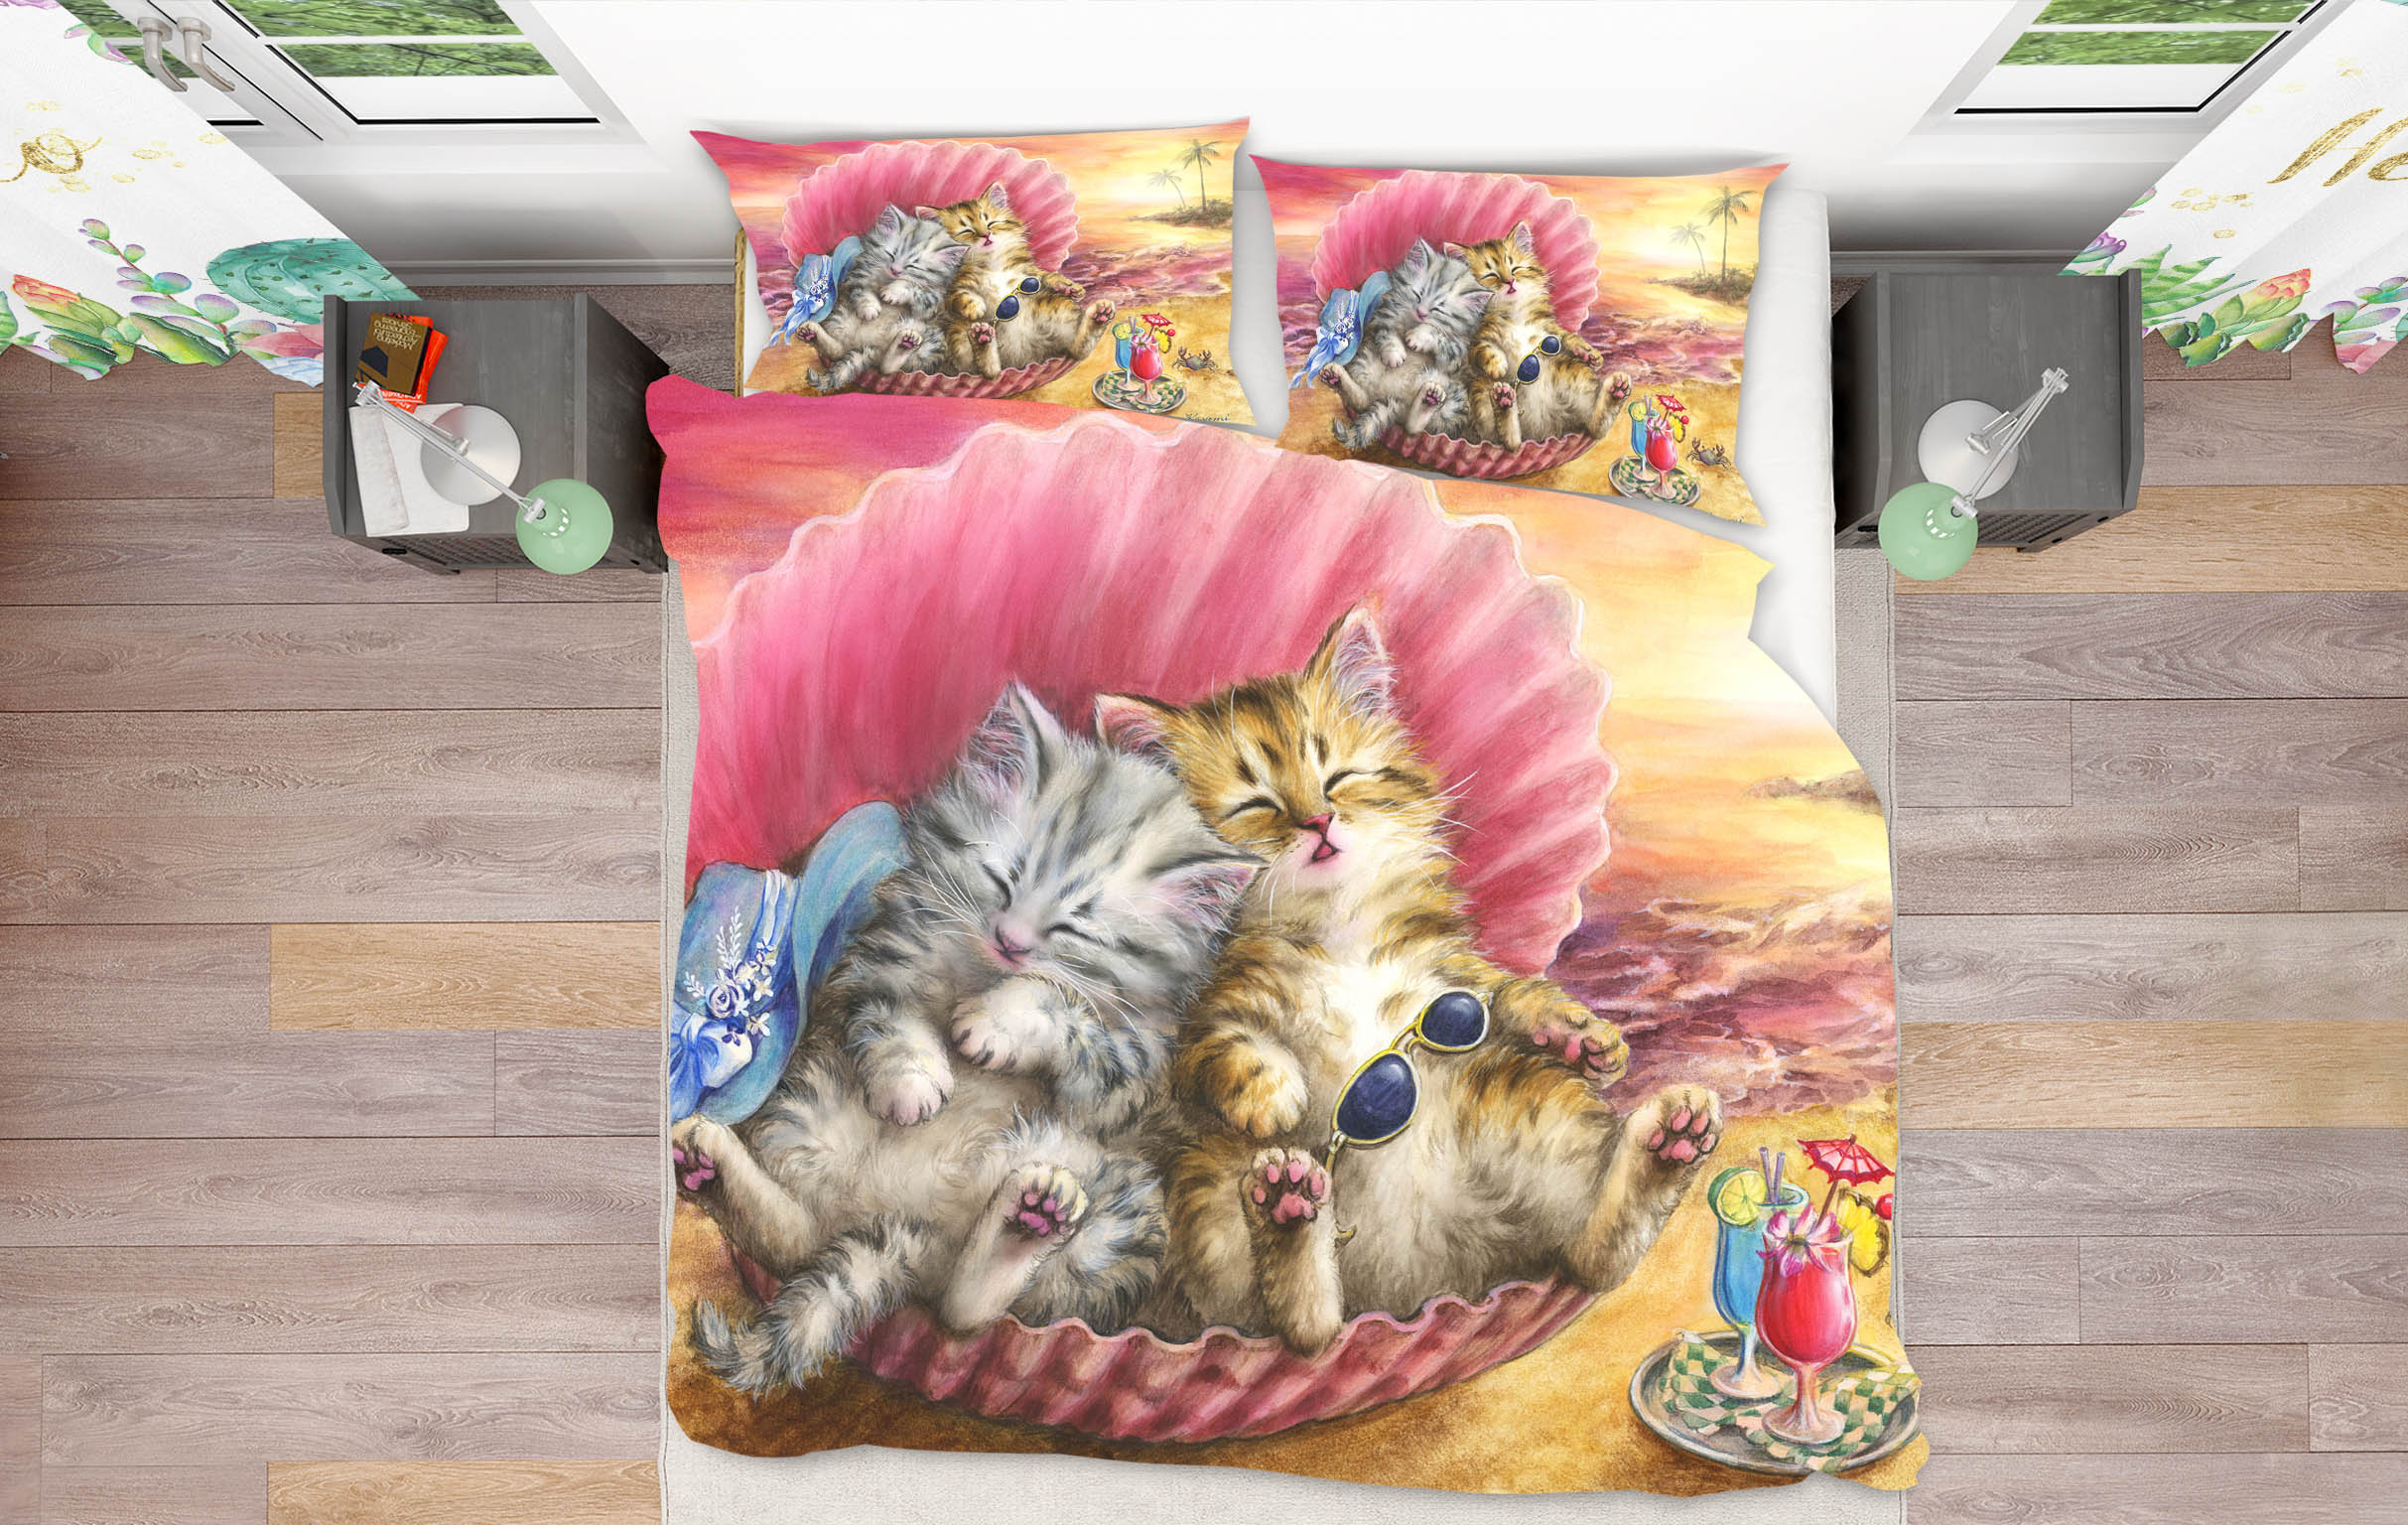 3D Pink Shell Cat 5836 Kayomi Harai Bedding Bed Pillowcases Quilt Cover Duvet Cover